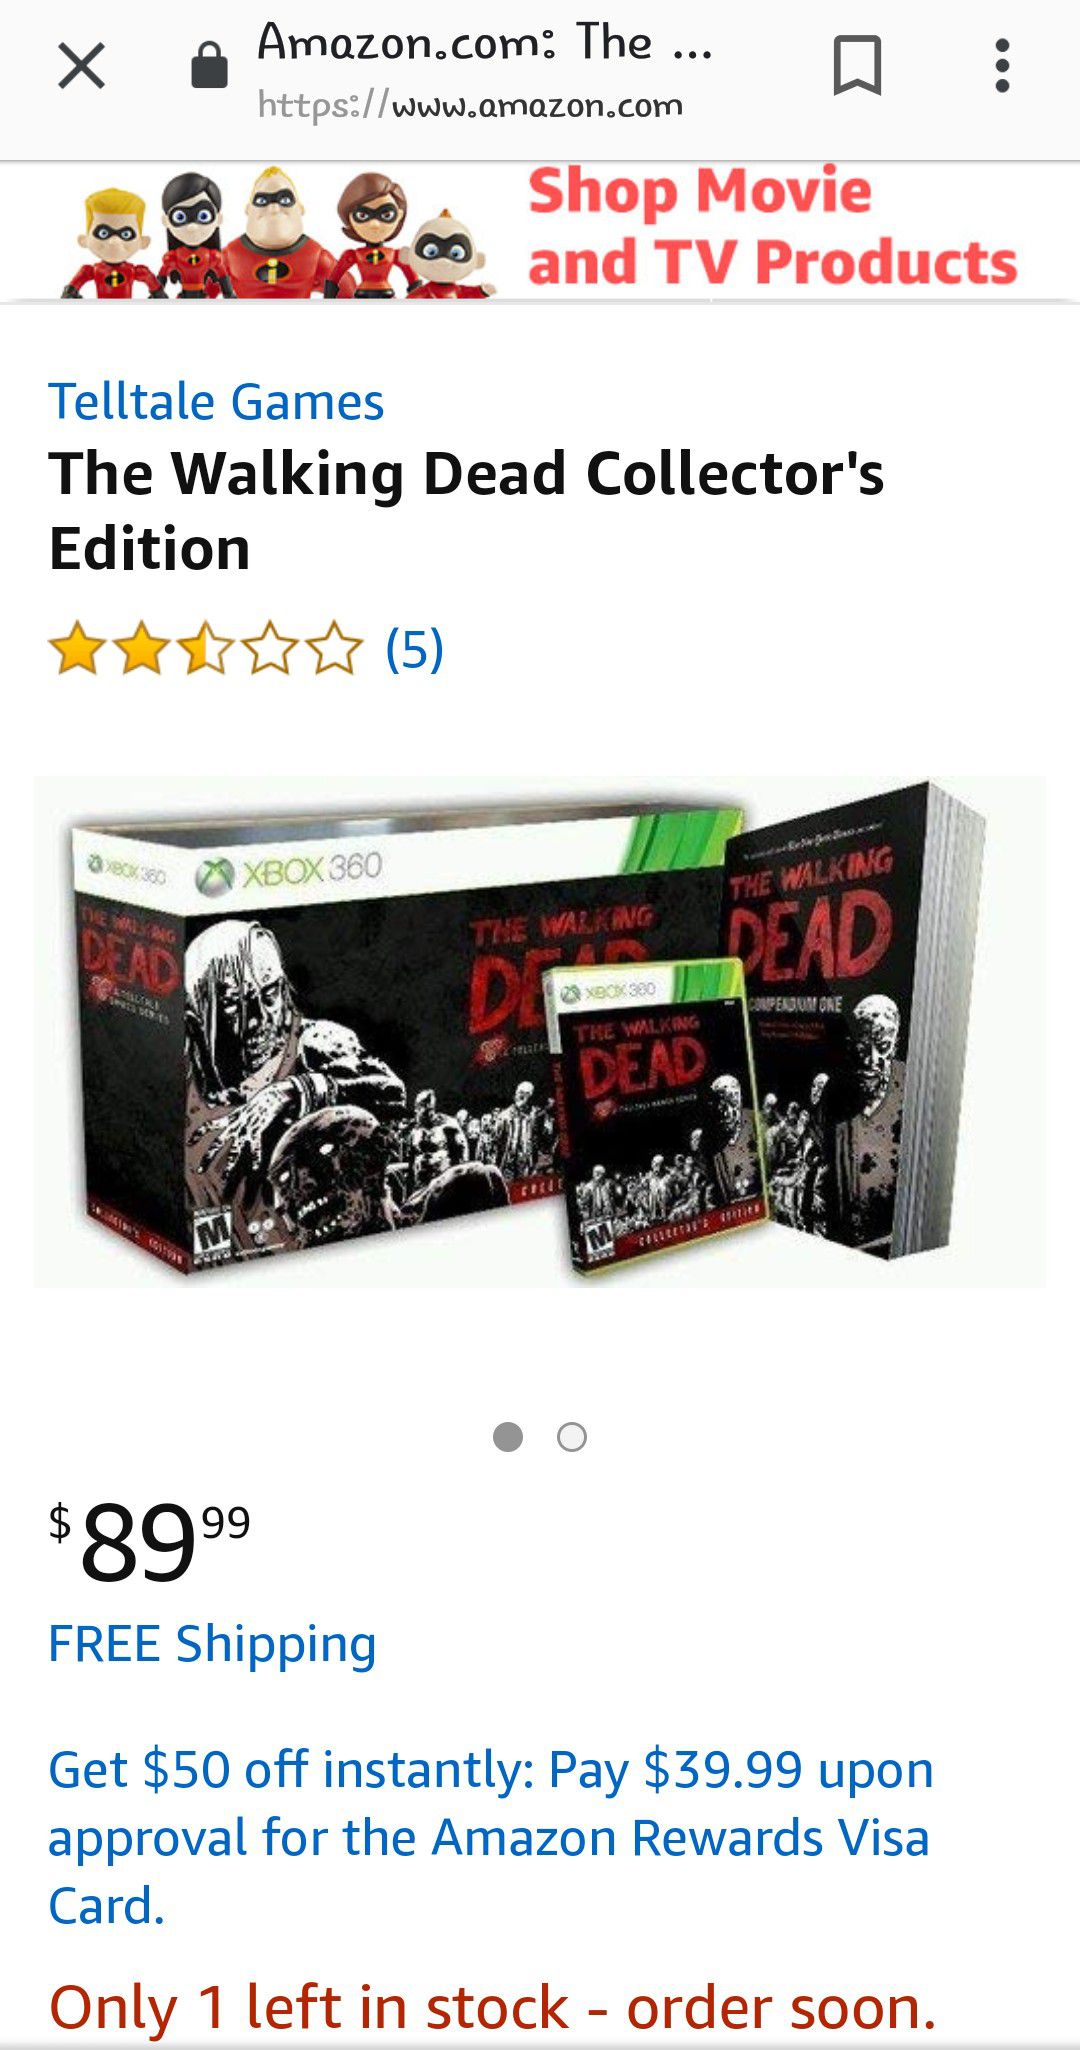 The Walking Dead collector's edition for Xbox 360